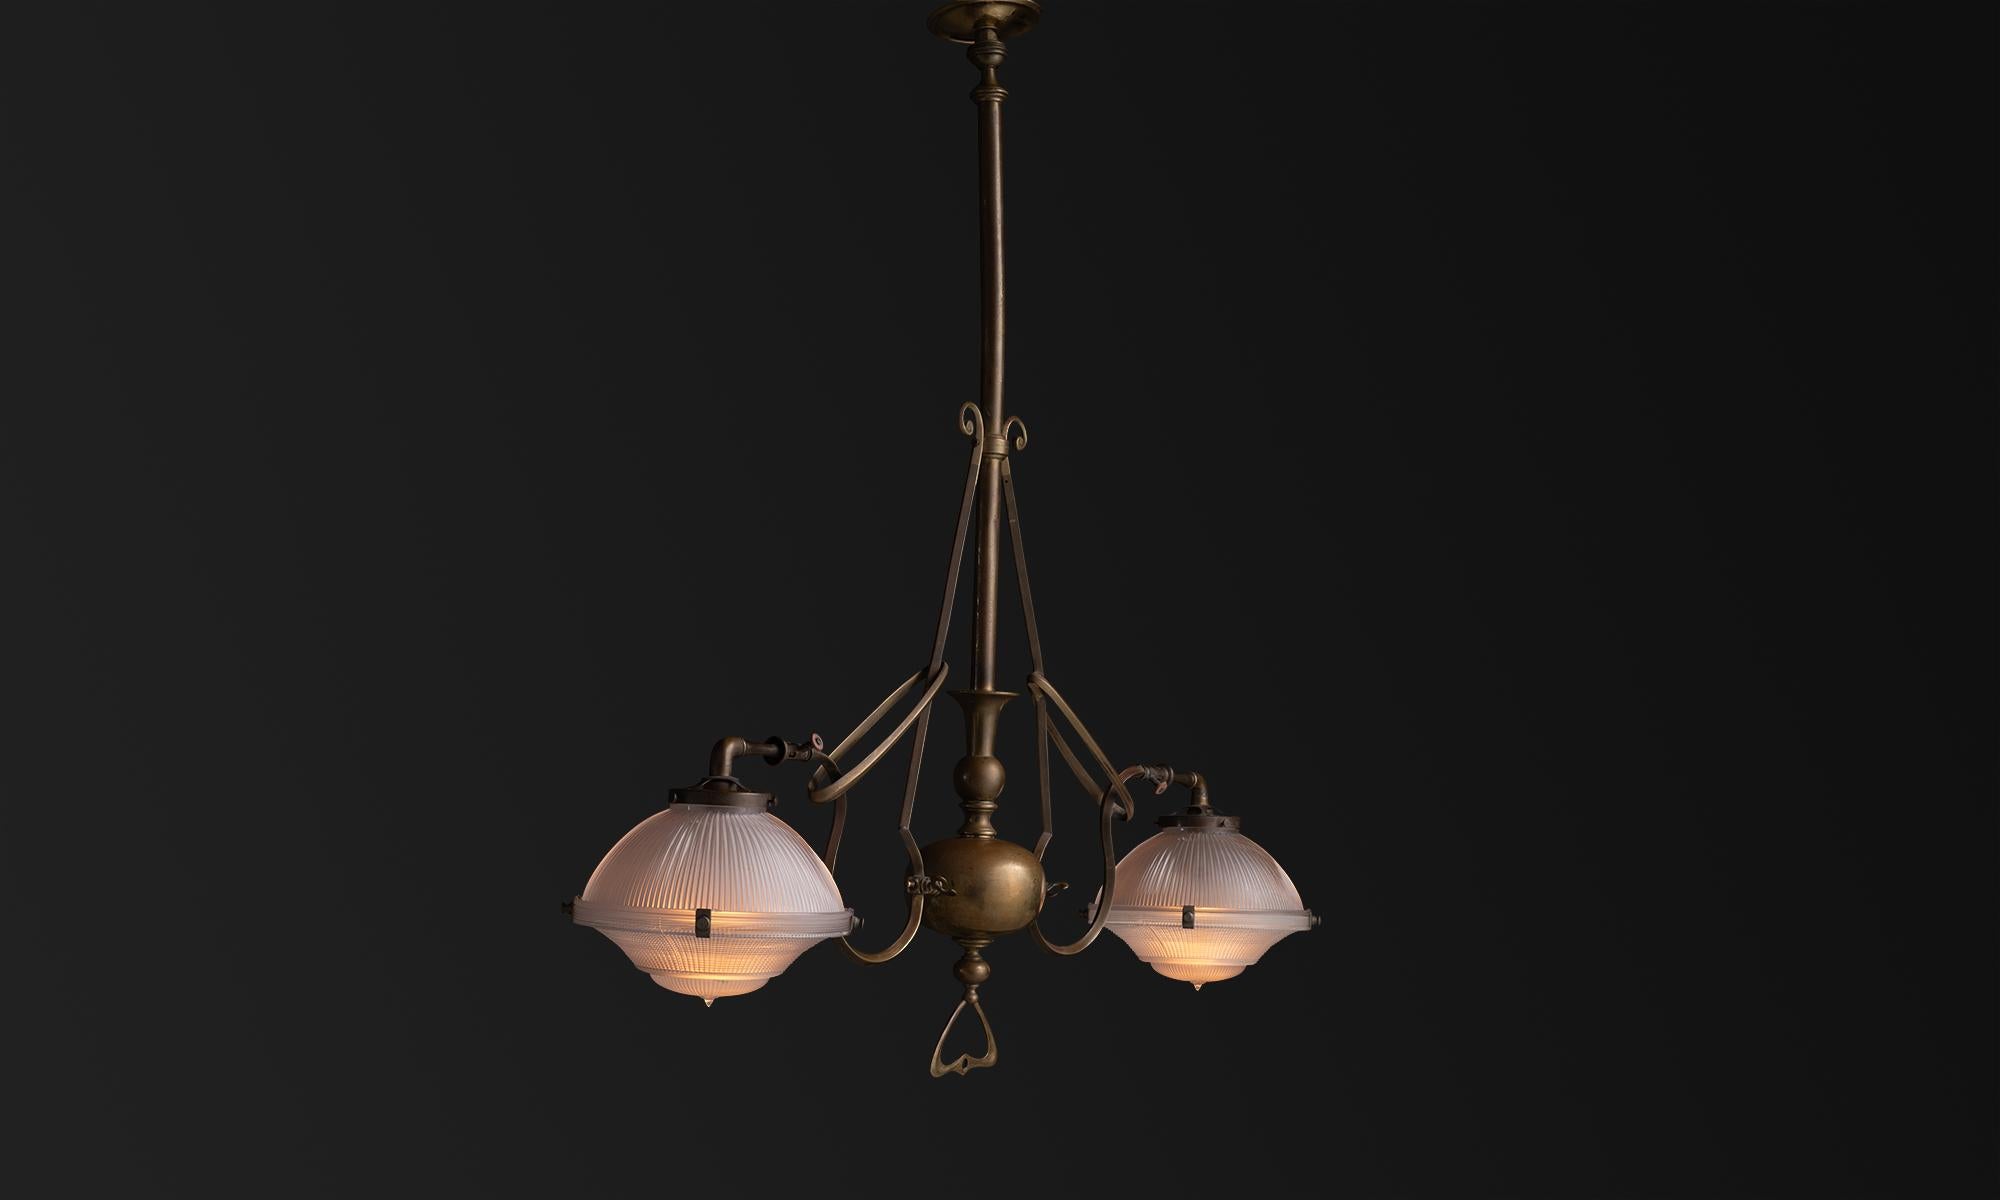 Holophane Gasolier Chandelier

England circa 1910

Victorian gas light recently covered to electric.

Measures 42”L x 10”d x 42”h

*Not UL Listed*